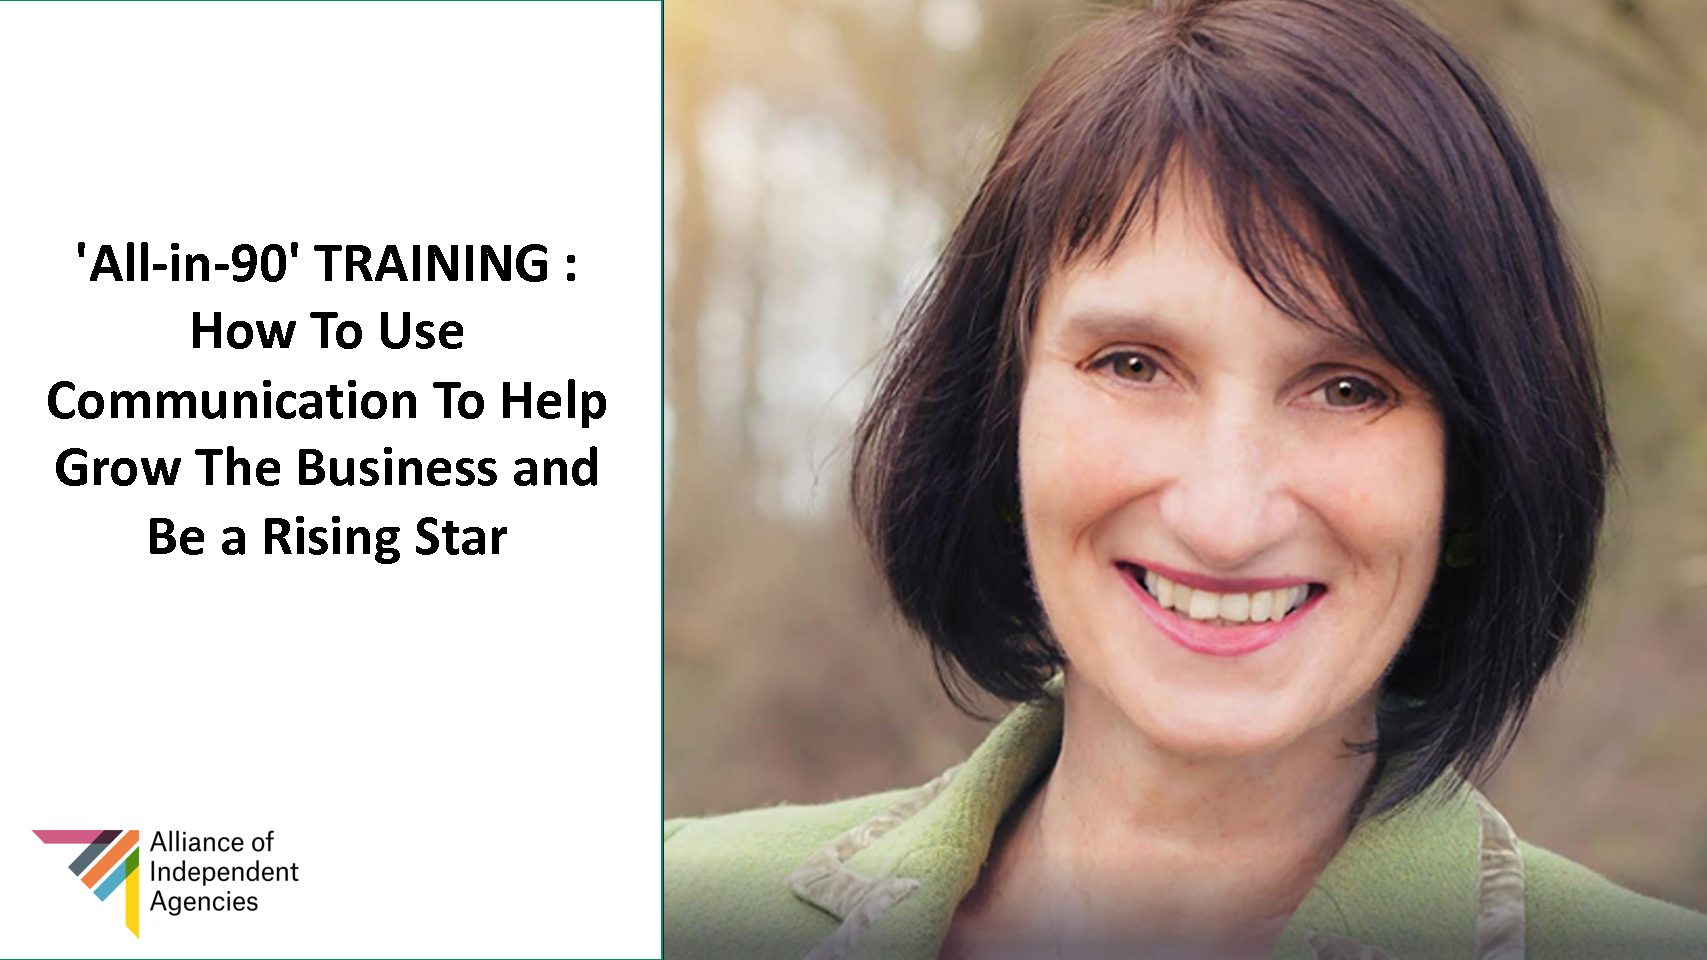 'All-in-90' TRAINING : How To Use Communication To Help Grow The Business and Be a Rising Star